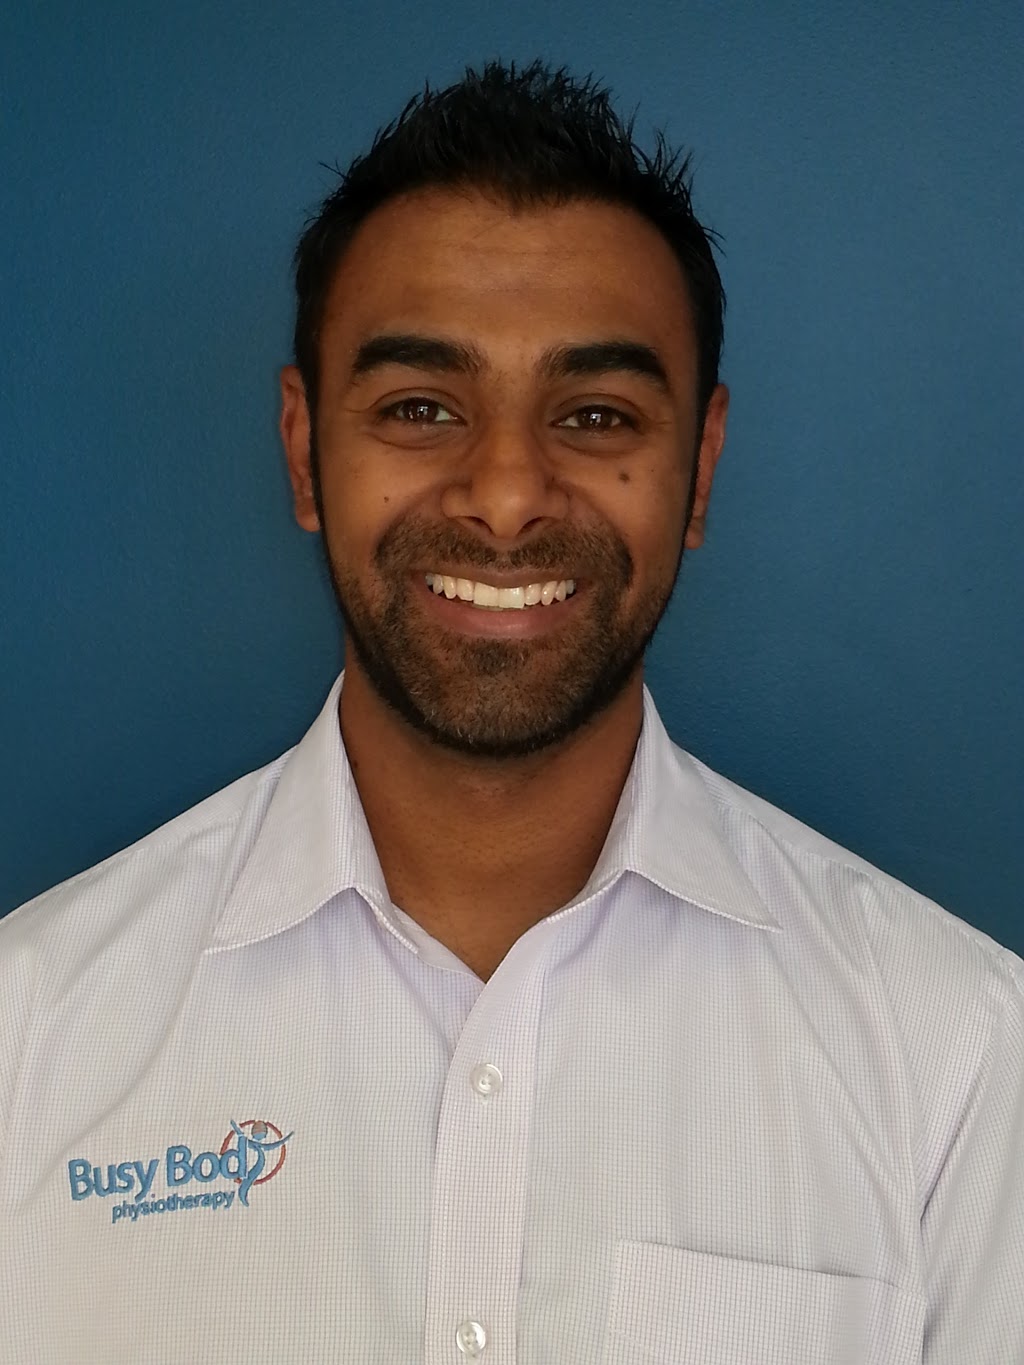 Busy Body Physiotherapy | physiotherapist | Shop 28 Arena Shopping Centre, 4 Cardinia Rd, Officer VIC 3809, Australia | 0359401160 OR +61 3 5940 1160